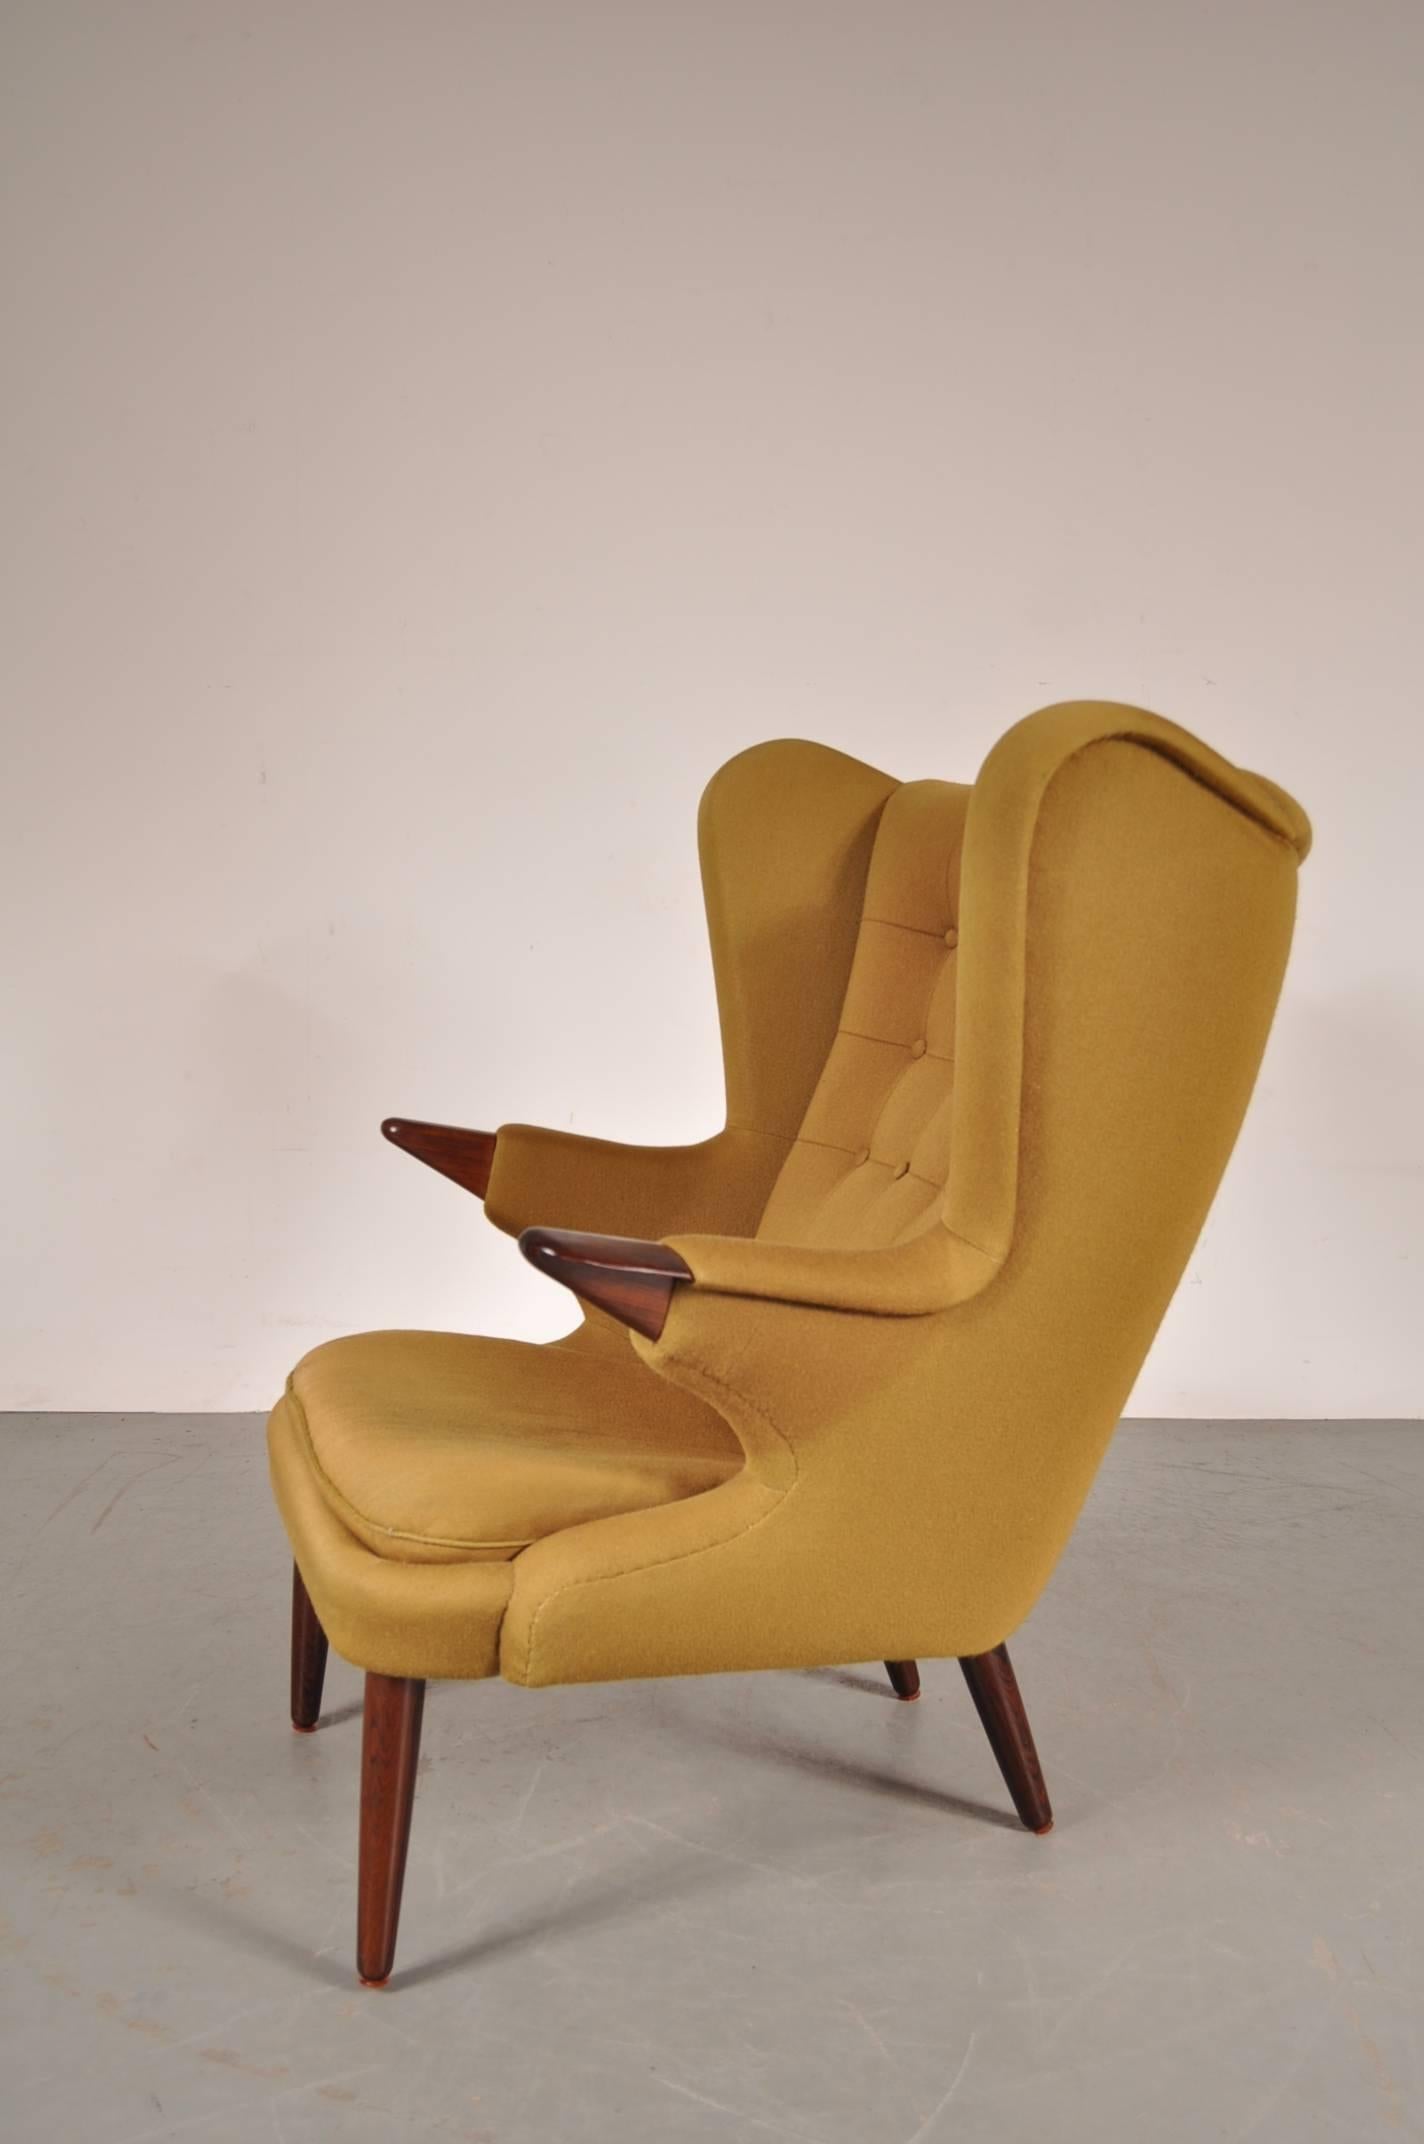 Impressive lounge chair model 91, designed by Svend Skipper and manufactured by Skipper Mobler in Denmark, circa 1960.

This beautiful chair has a very comfortable, deep seating experience. The legs of the chair are made of high quality rosewood and